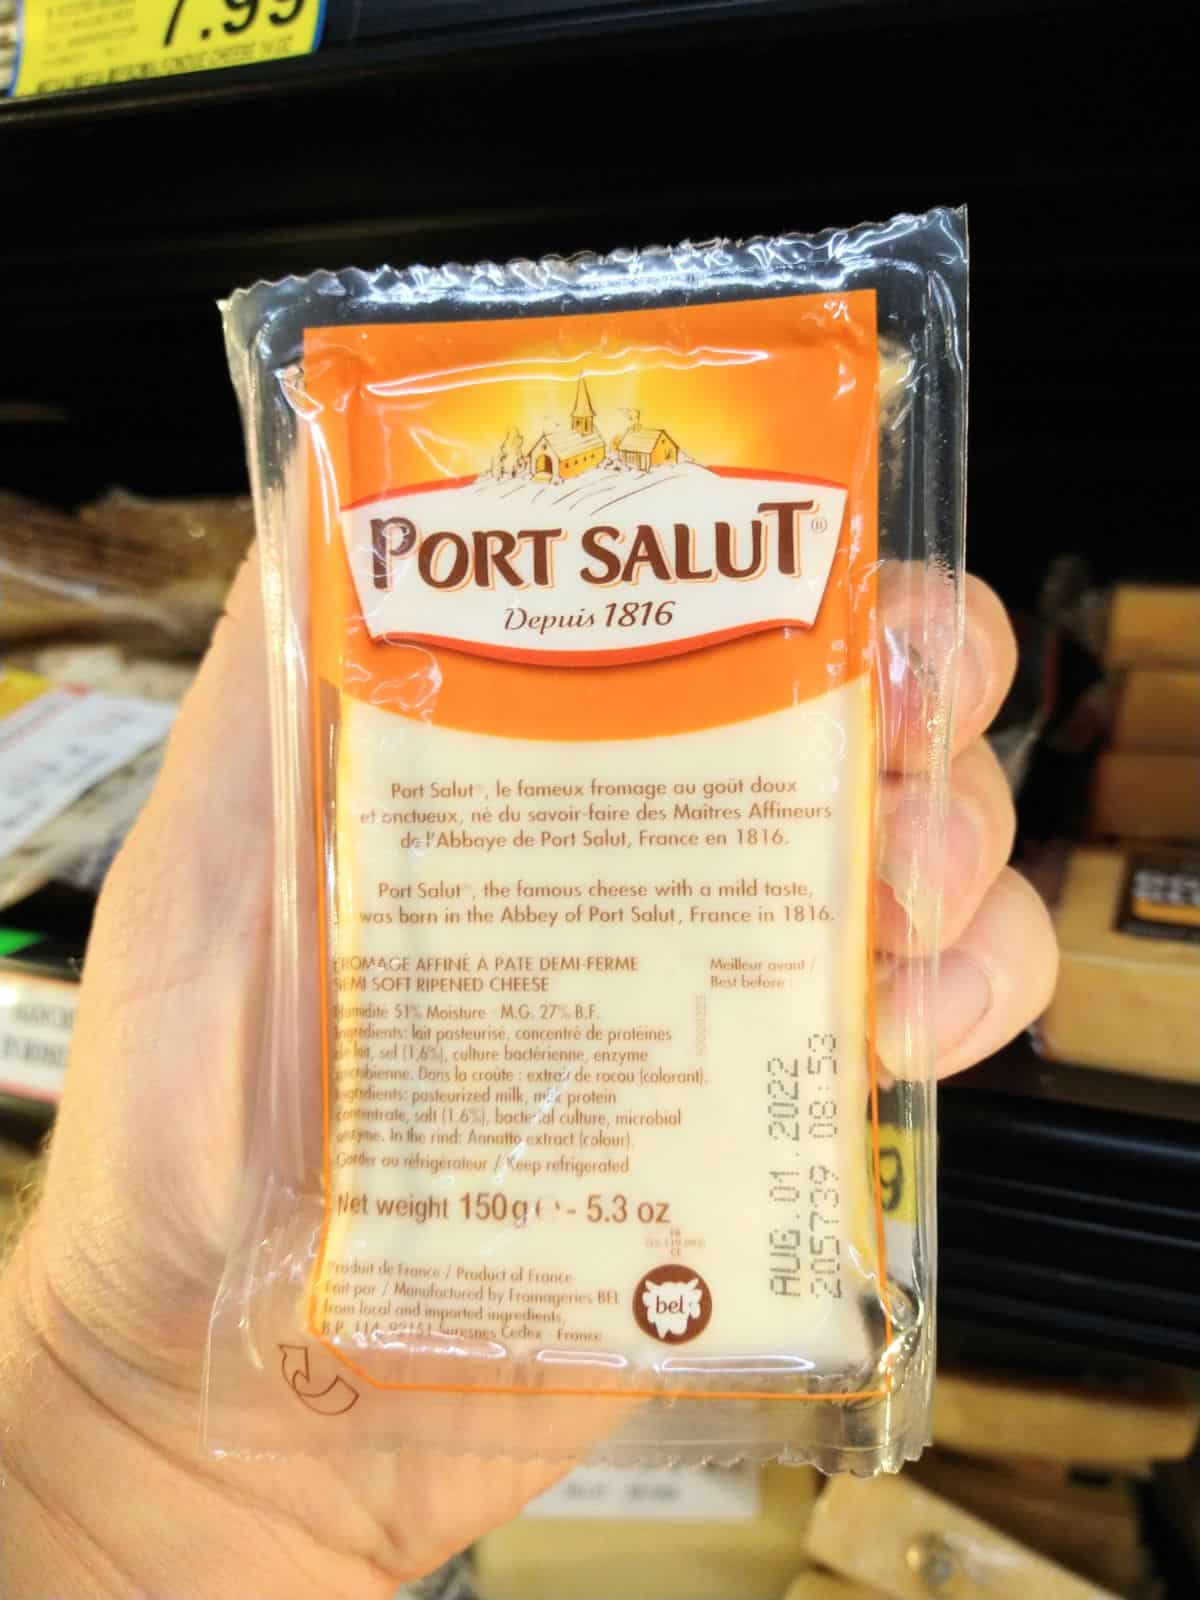 Someone holding a package of Port Salut at the grocery store in front of a display of cheese.